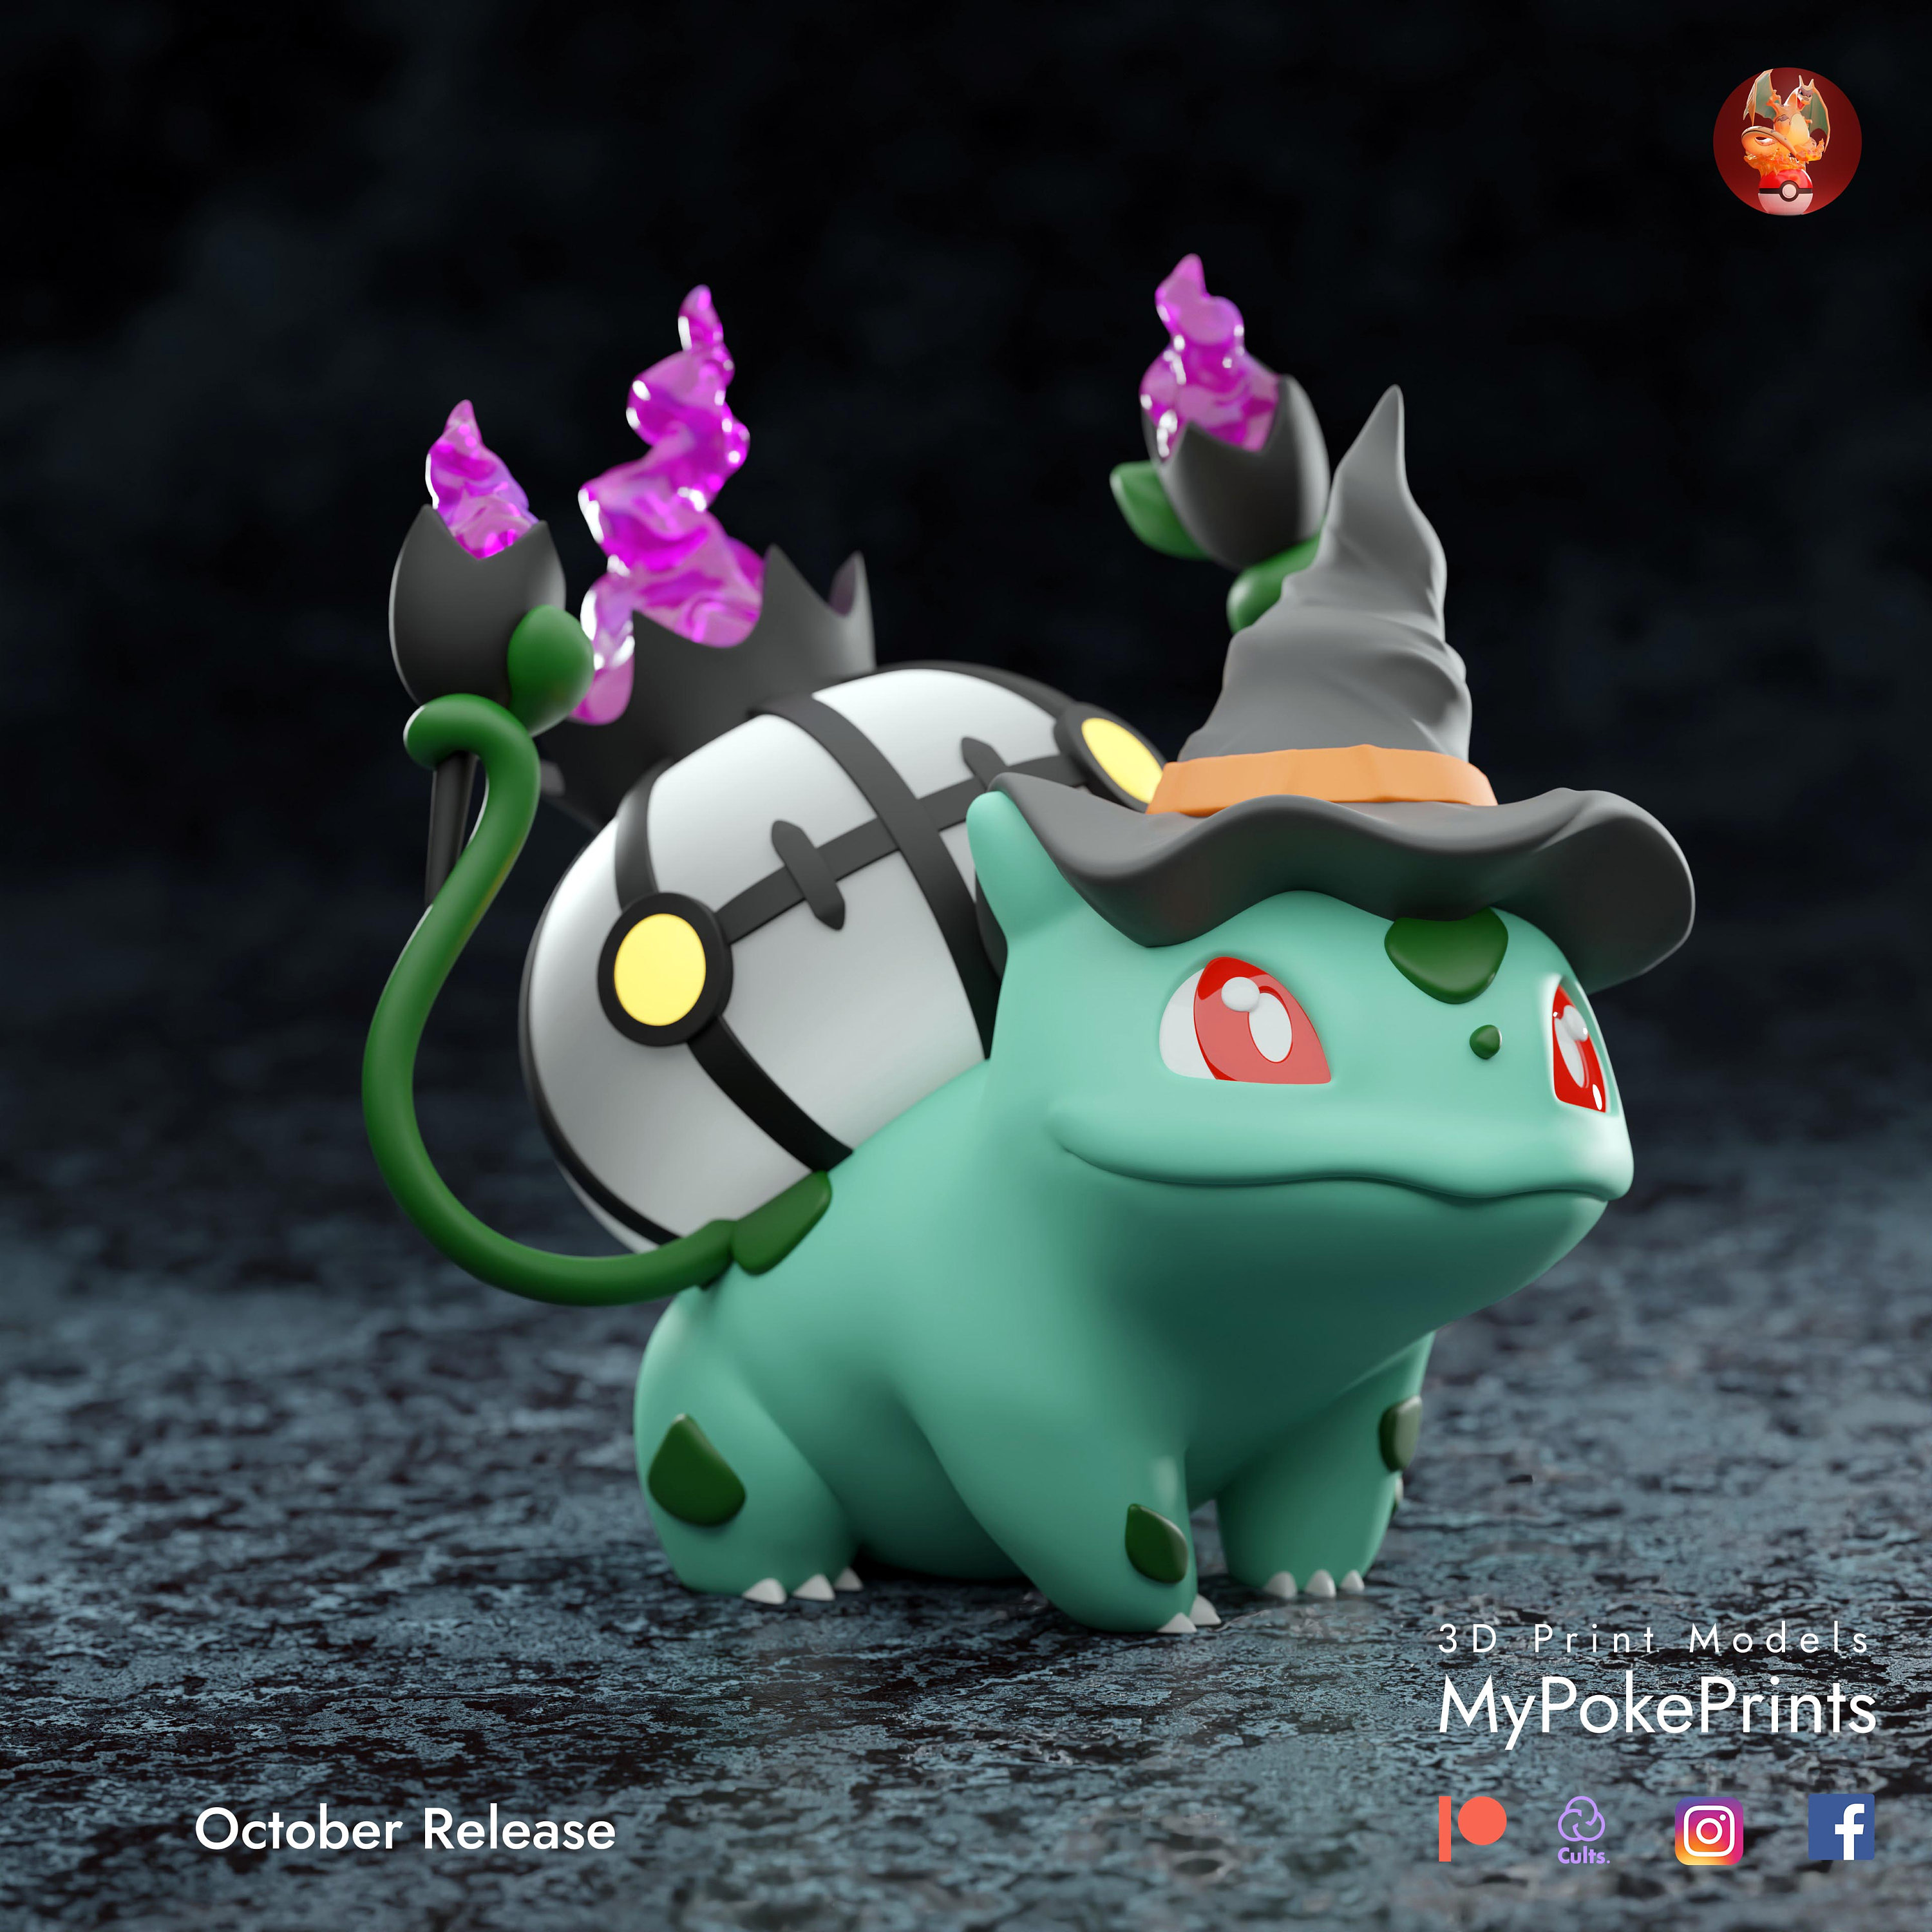 Halloween bulbasaur cosplay as witch pokemon unite collectibles pokeball pokedex painted and unpainted versions available